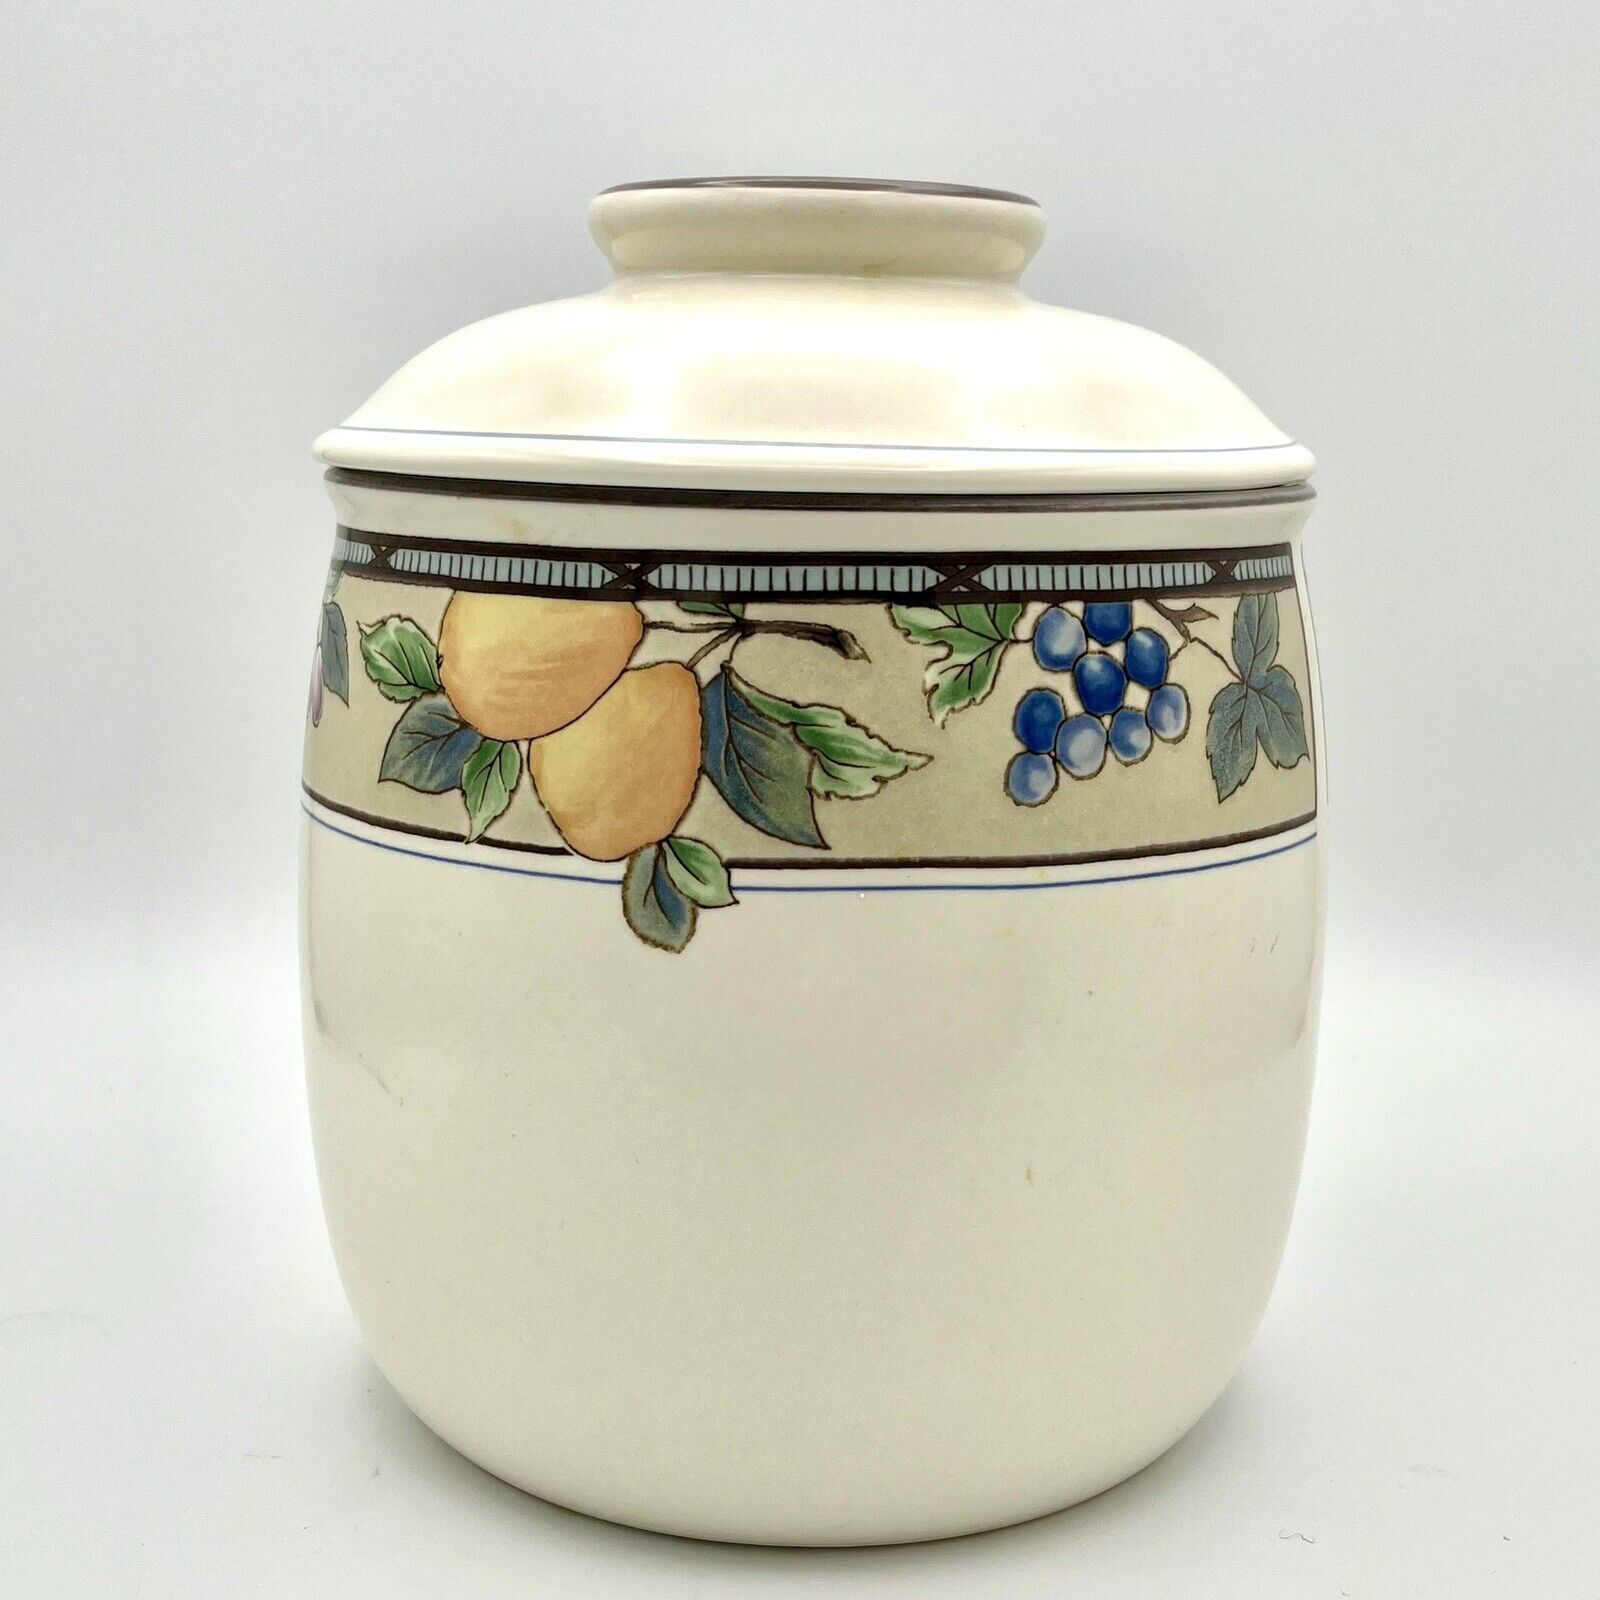 Vntg Mikasa Intaglio Canister Garden Harvest CAC29 Rubber Seal 8”